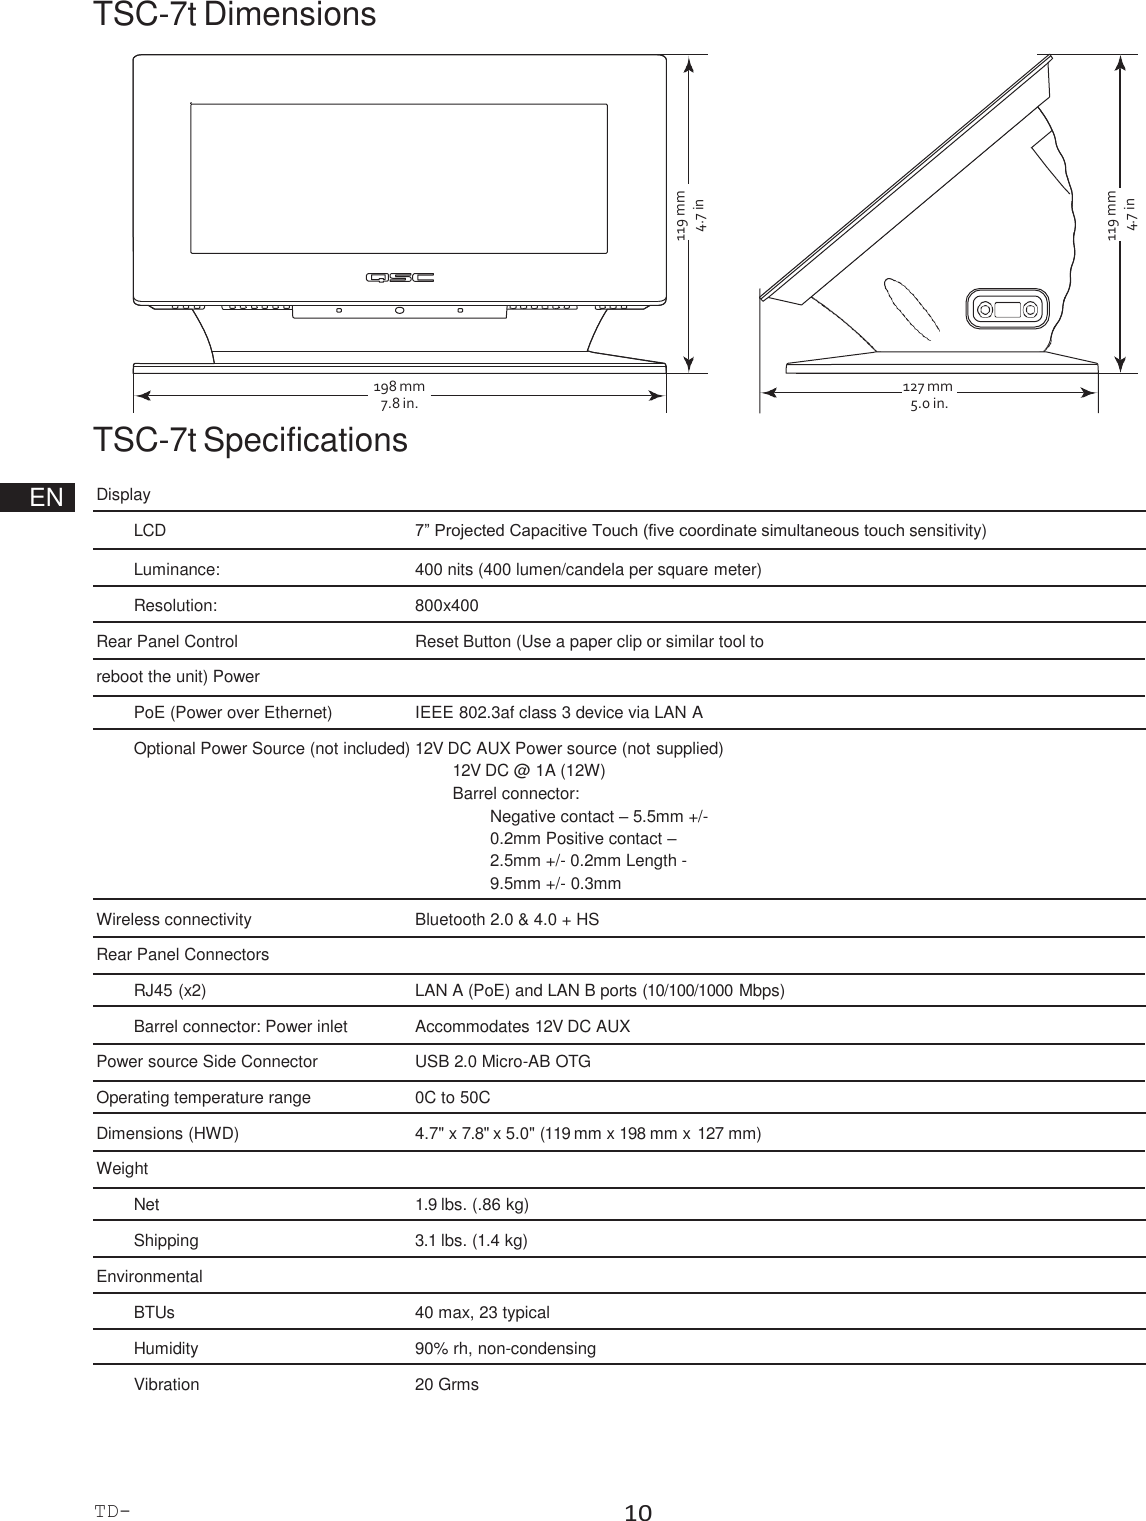 TD-000508-00-B 10  198 mm 7.8 in. 127 mm 5.0 in. TSC-7t Dimensions                 TSC-7t Specifications      EN  Display   LCD  7” Projected Capacitive Touch (five coordinate simultaneous touch sensitivity)   Luminance:  400 nits (400 lumen/candela per square meter)   Resolution:  800x400   Rear Panel Control  Reset Button (Use a paper clip or similar tool to reboot the unit) Power PoE (Power over Ethernet)  IEEE 802.3af class 3 device via LAN A   Optional Power Source (not included) 12V DC AUX Power source (not supplied) 12V DC @ 1A (12W) Barrel connector: Negative contact – 5.5mm +/- 0.2mm Positive contact – 2.5mm +/- 0.2mm Length - 9.5mm +/- 0.3mm   Wireless connectivity  Bluetooth 2.0 &amp; 4.0 + HS Rear Panel Connectors RJ45 (x2)  LAN A (PoE) and LAN B ports (10/100/1000 Mbps)   Barrel connector: Power inlet  Accommodates 12V DC AUX Power source Side Connector  USB 2.0 Micro-AB OTG Operating temperature range  0C to 50C   Dimensions (HWD)  4.7&quot; x 7.8&quot; x 5.0&quot; (119 mm x 198 mm x 127 mm) Weight Net  1.9 lbs. (.86 kg)   Shipping  3.1 lbs. (1.4 kg)   Environmental   BTUs  40 max, 23 typical   Humidity  90% rh, non-condensing   Vibration  20 Grms 119 mm 4.7 in 119 mm 4.7 in 